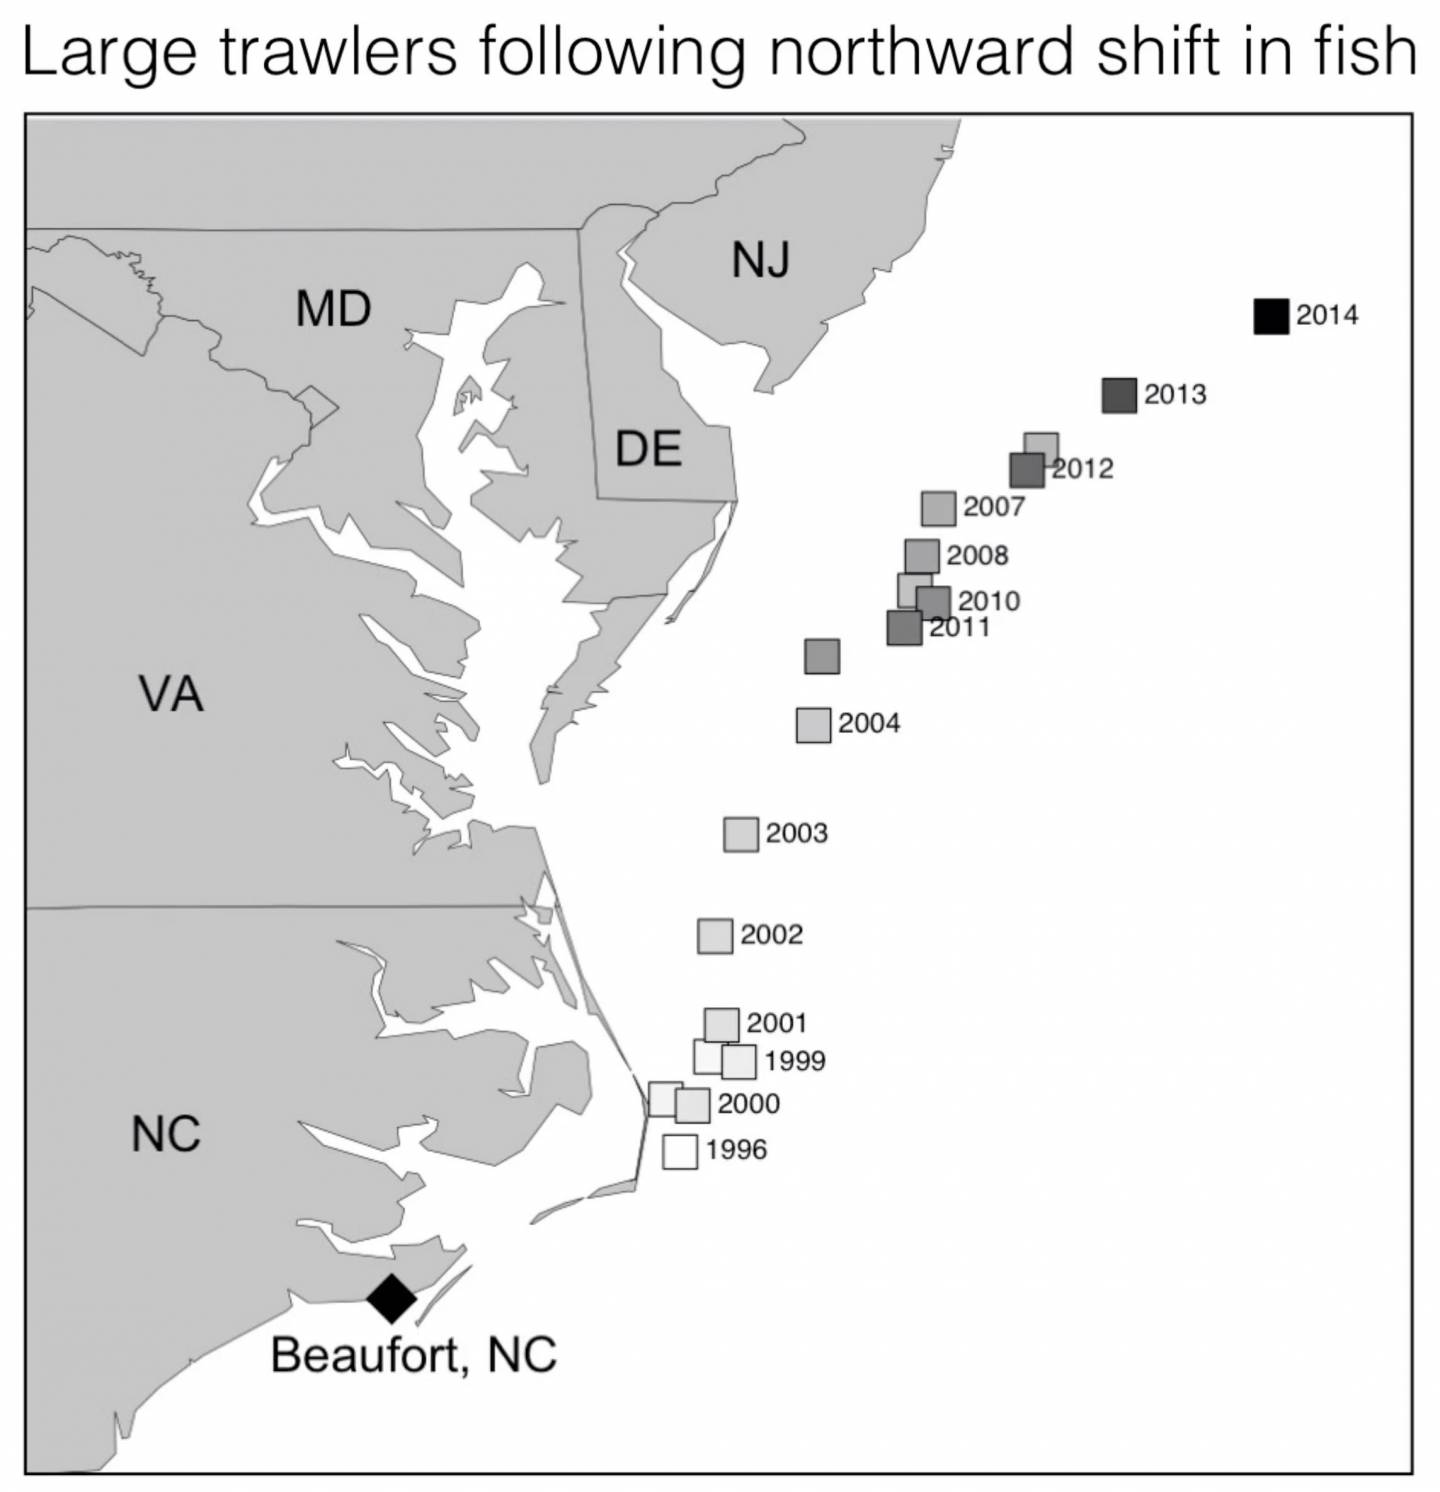 A map of the eastern coast of the United States showing where fishing boats from Beaufort, NC are fishing